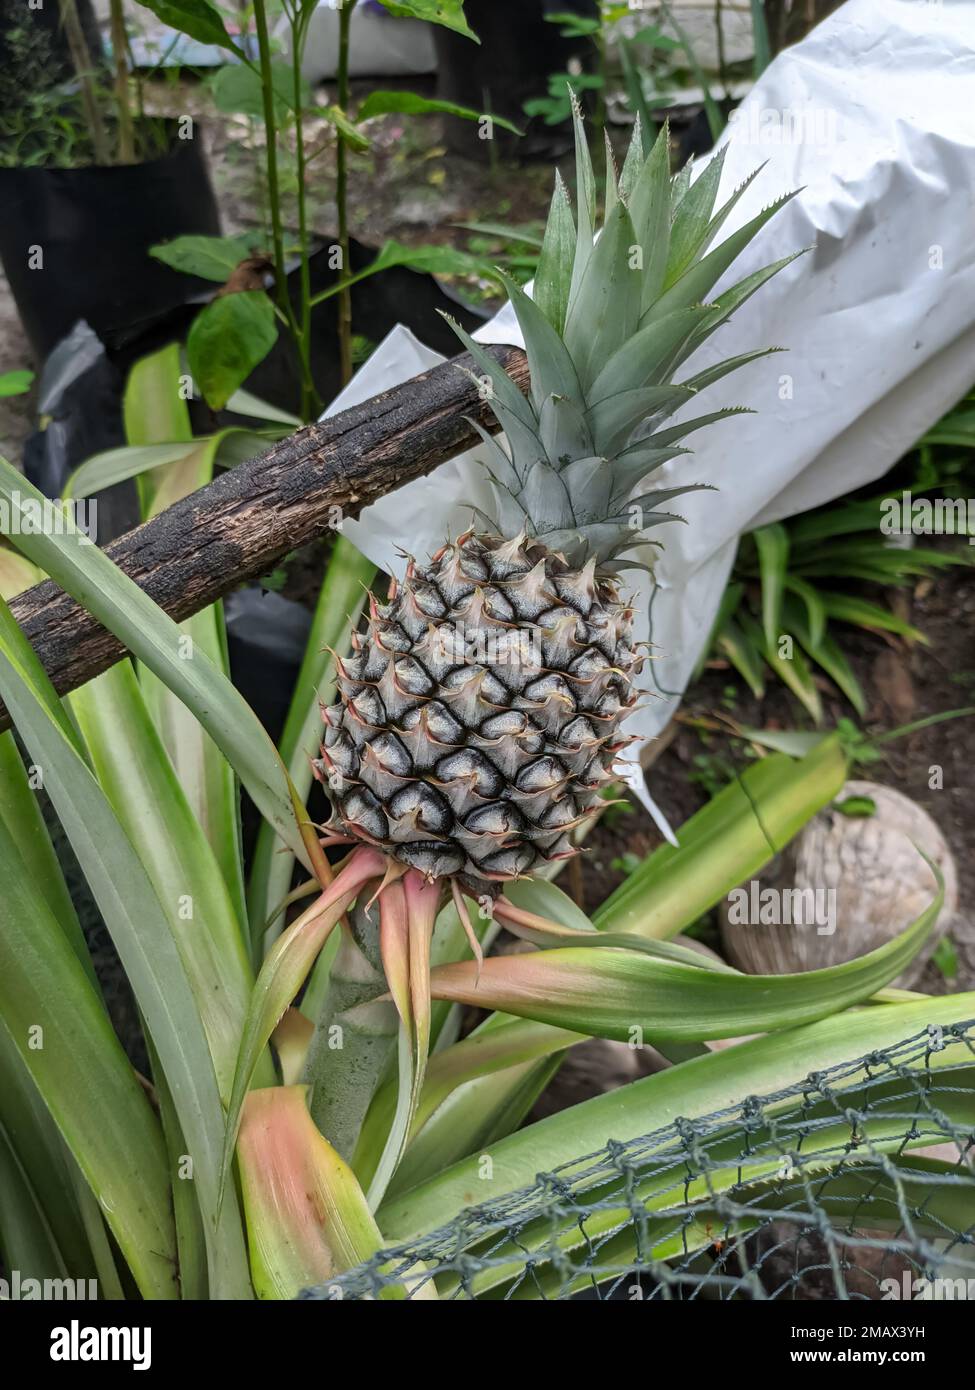 Pineapple is a tropical plant with edible fruit and is the most economically important plant in the family Bromeliaceae.Scientific name for pineapple Ananas comosus... Stock Photo